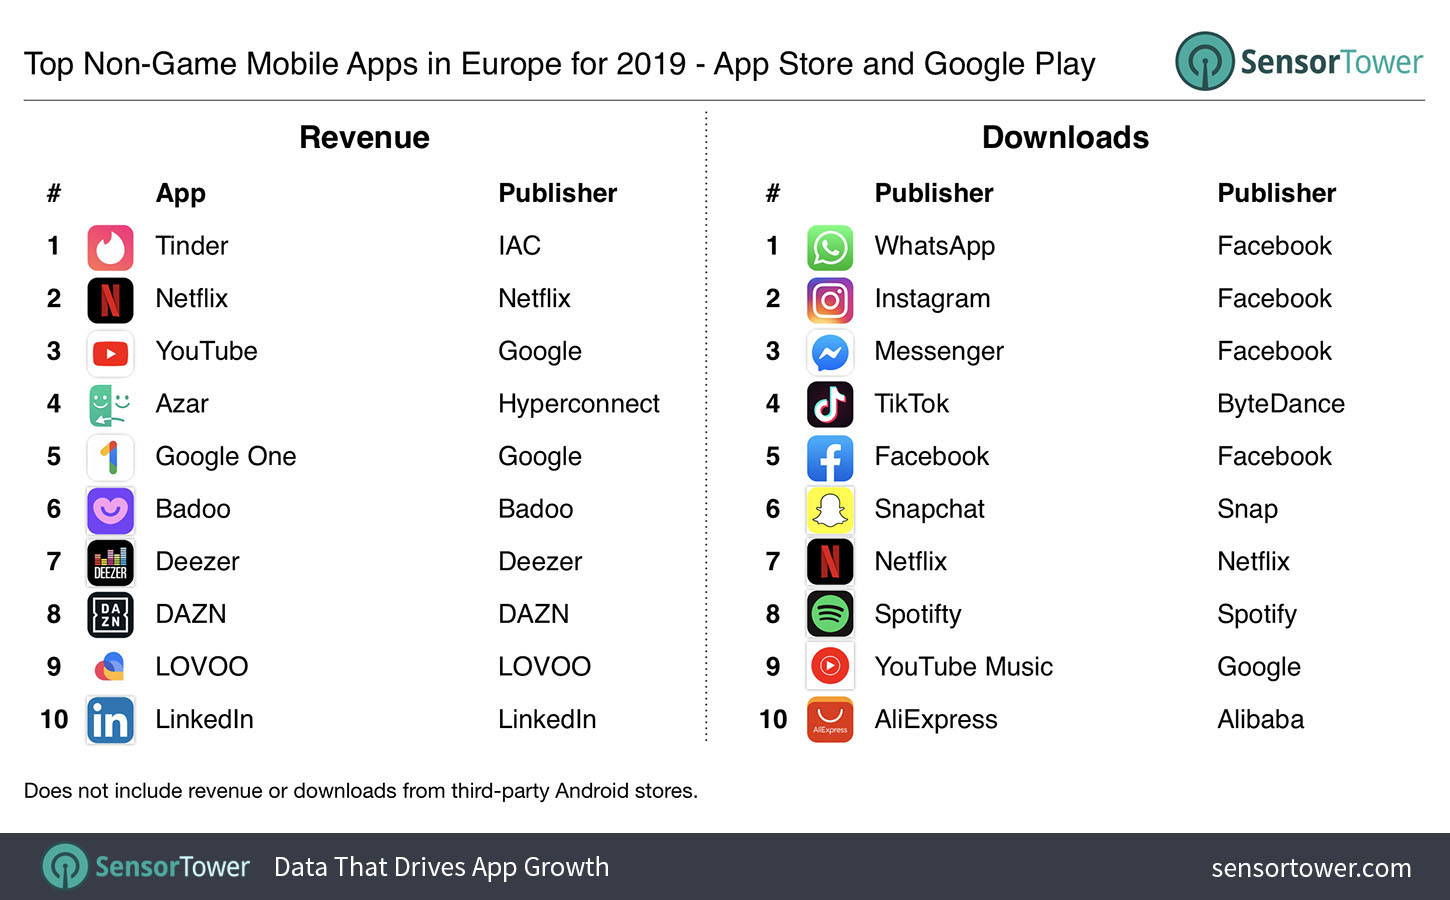 Top non-game mobile apps in Europe in 2019 by revenue and downloads